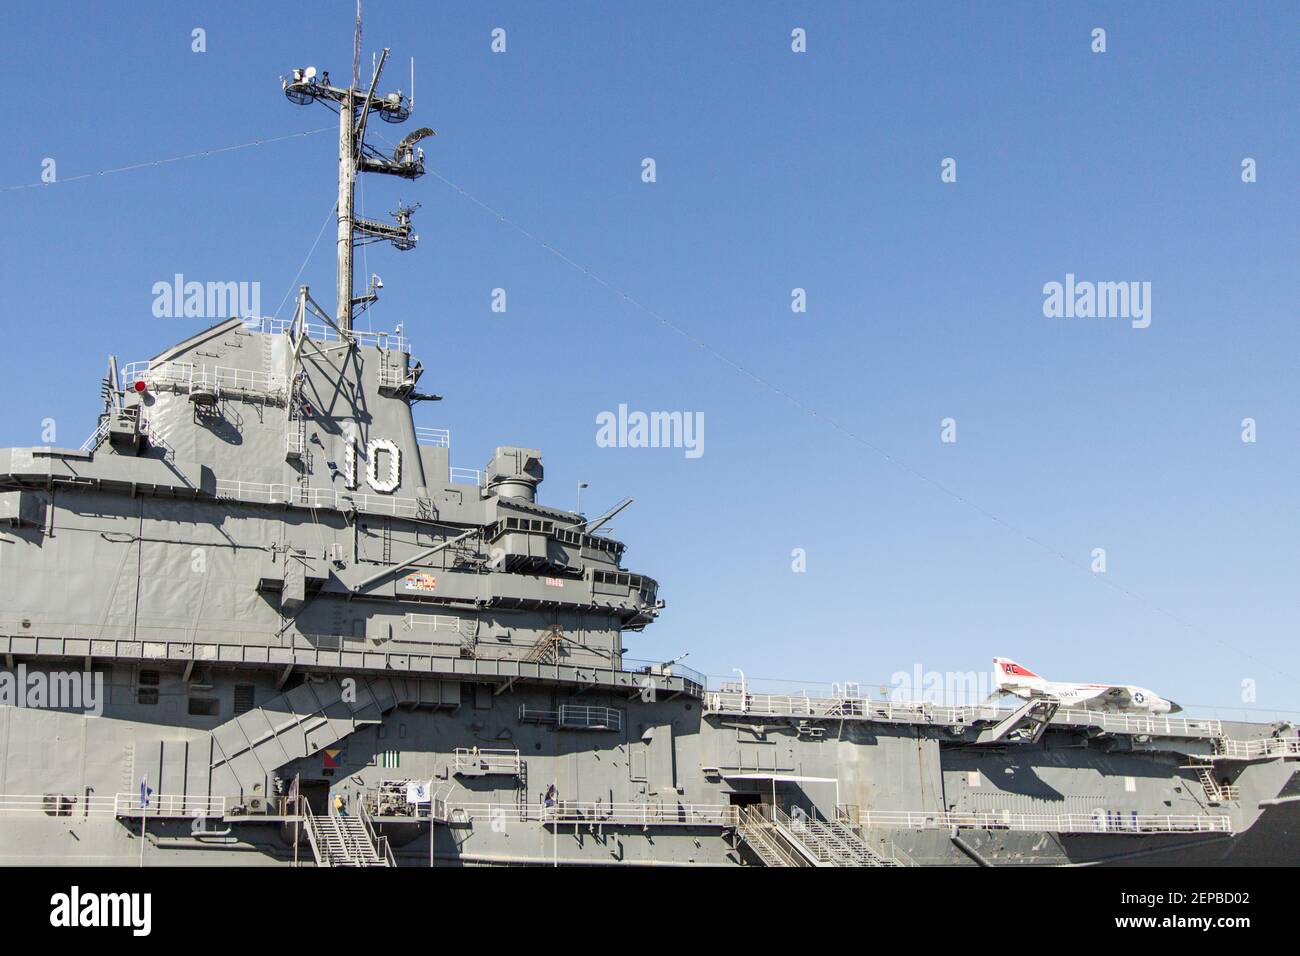 Mount Pleasant, South Carolina, USA - February 21, 2021 - The USS Yorktown aircraft carrier now operates as a museum and memorial at Patriots Point. Stock Photo